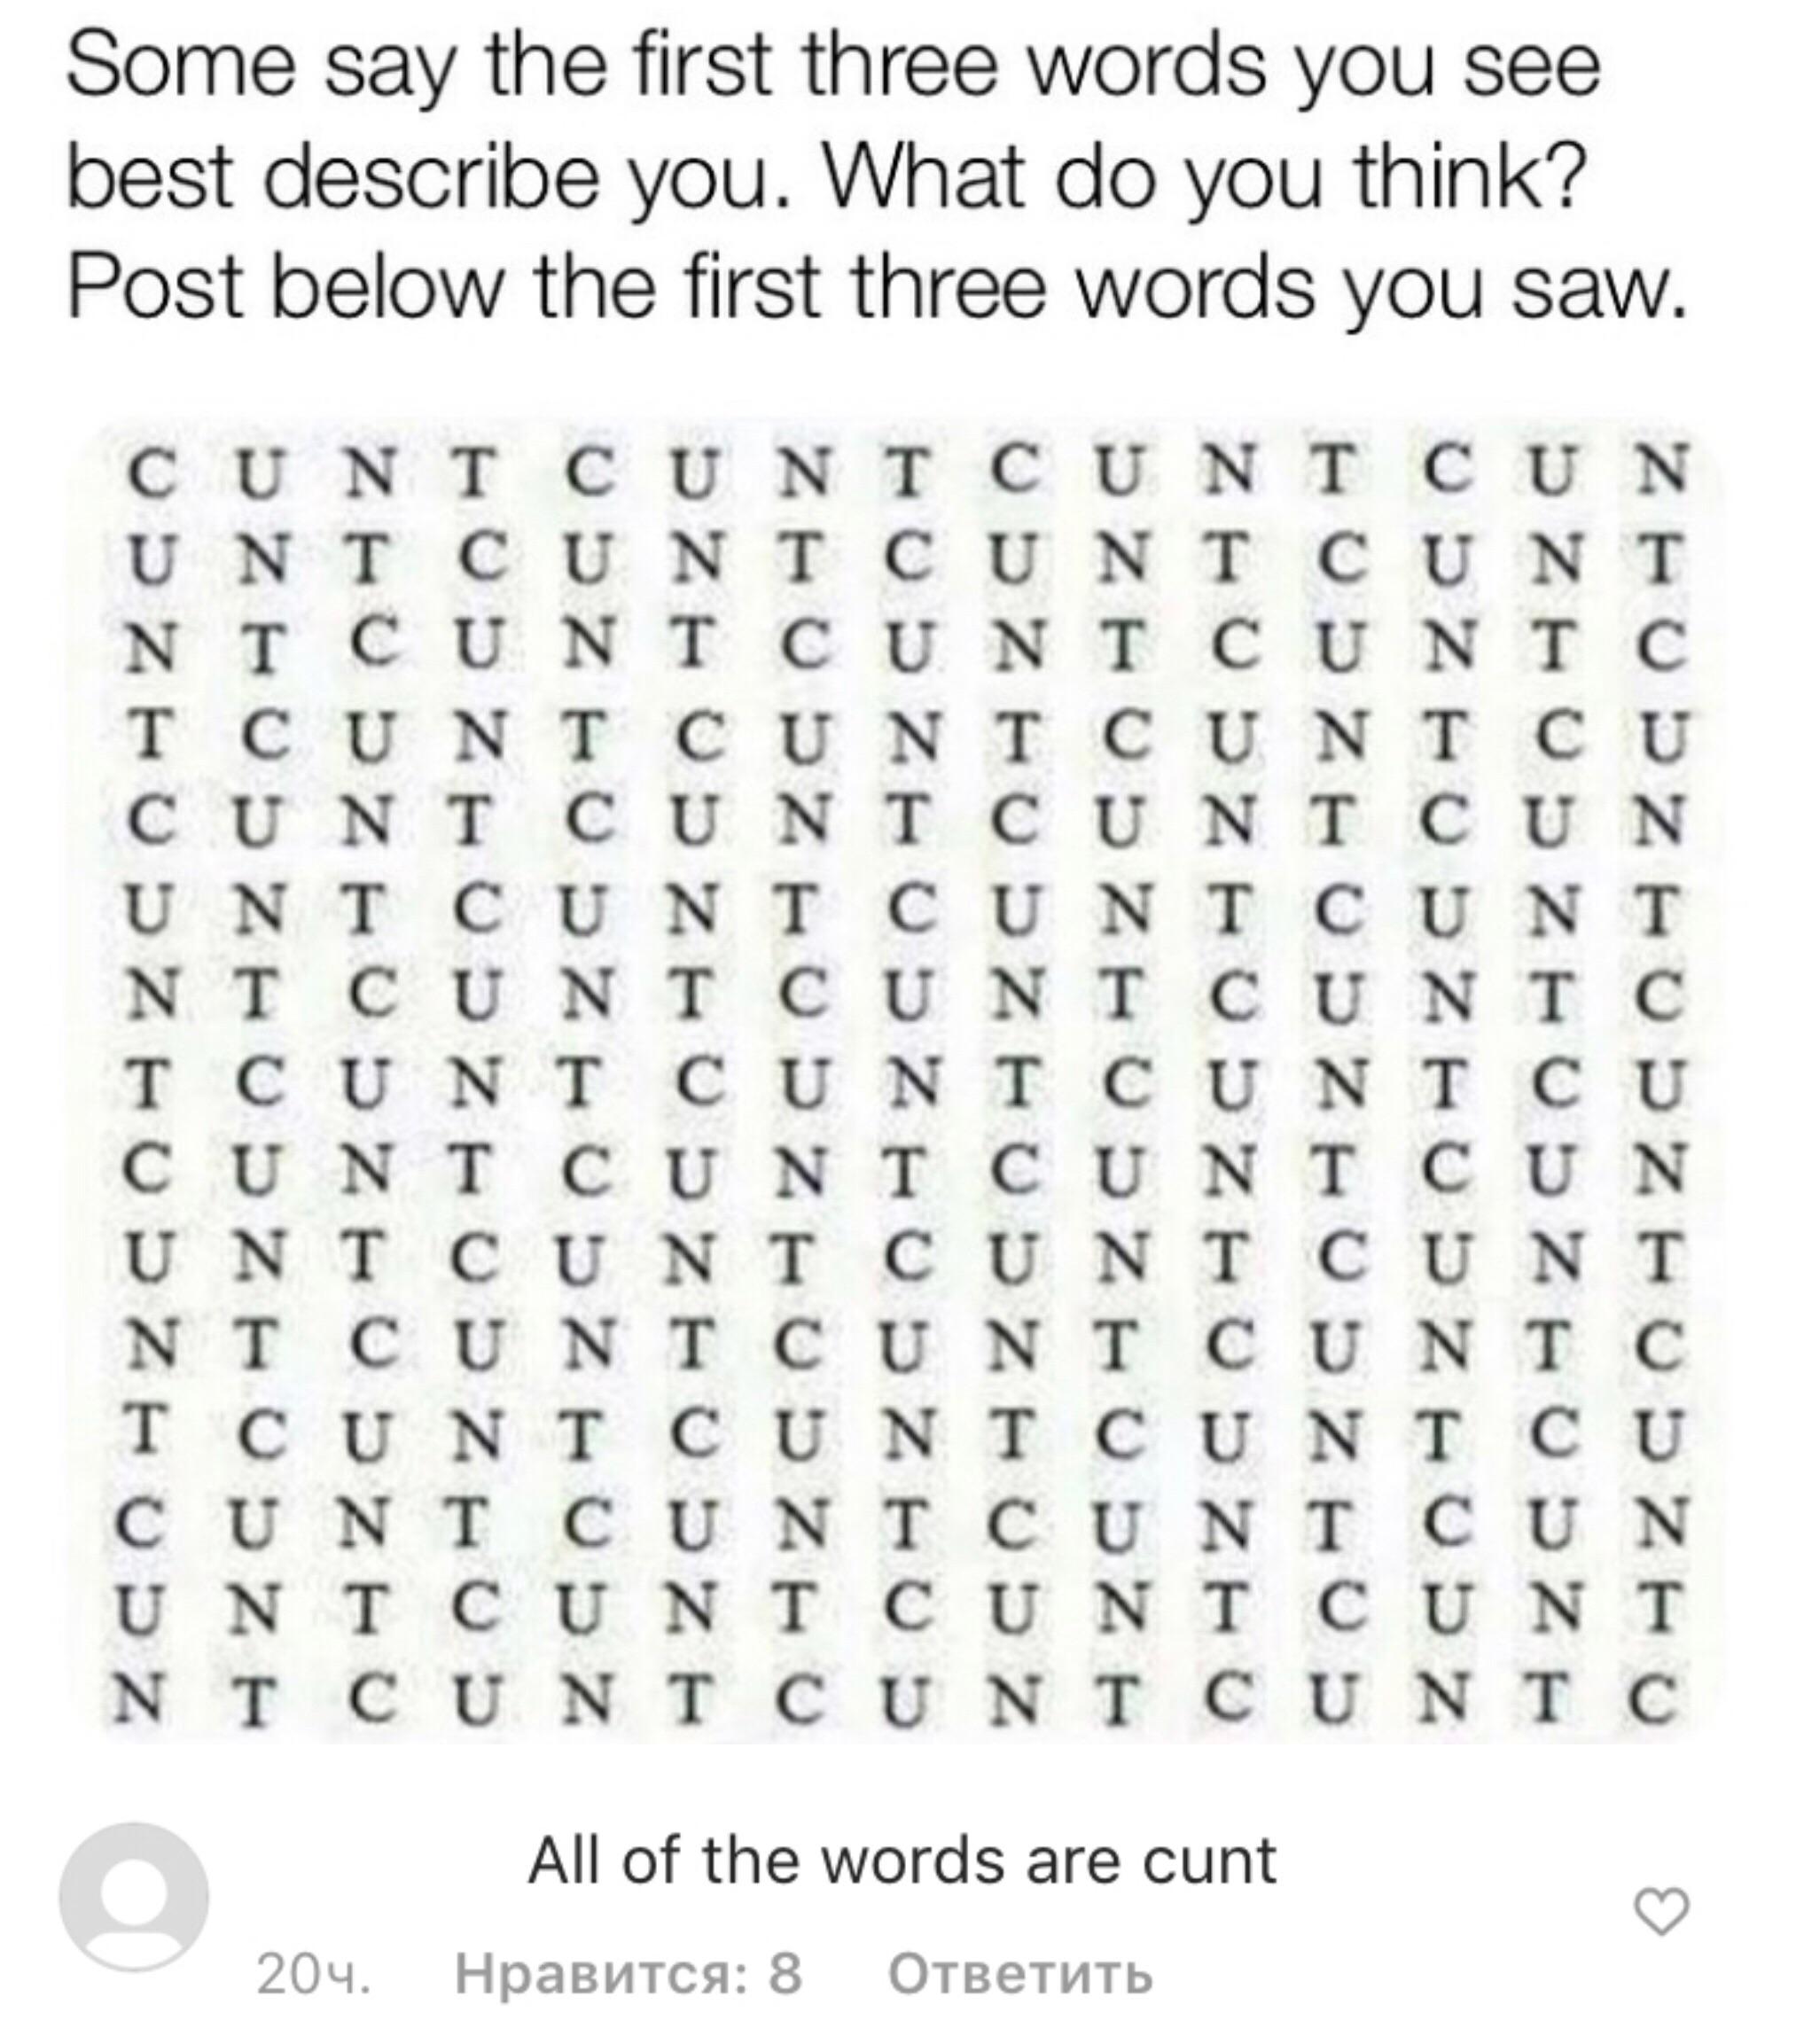 missed - activities word search - Some say the first three words you see best describe you. What do you think? Post below the first three words you saw. Cuni Cunt Cuni Cun Unt Cuni Cunt Cunt Nt Cunt Cu Nicu Nic T Cunt Cu Nicunt Unt Cu Nicu Nic Unt Cunt Cu